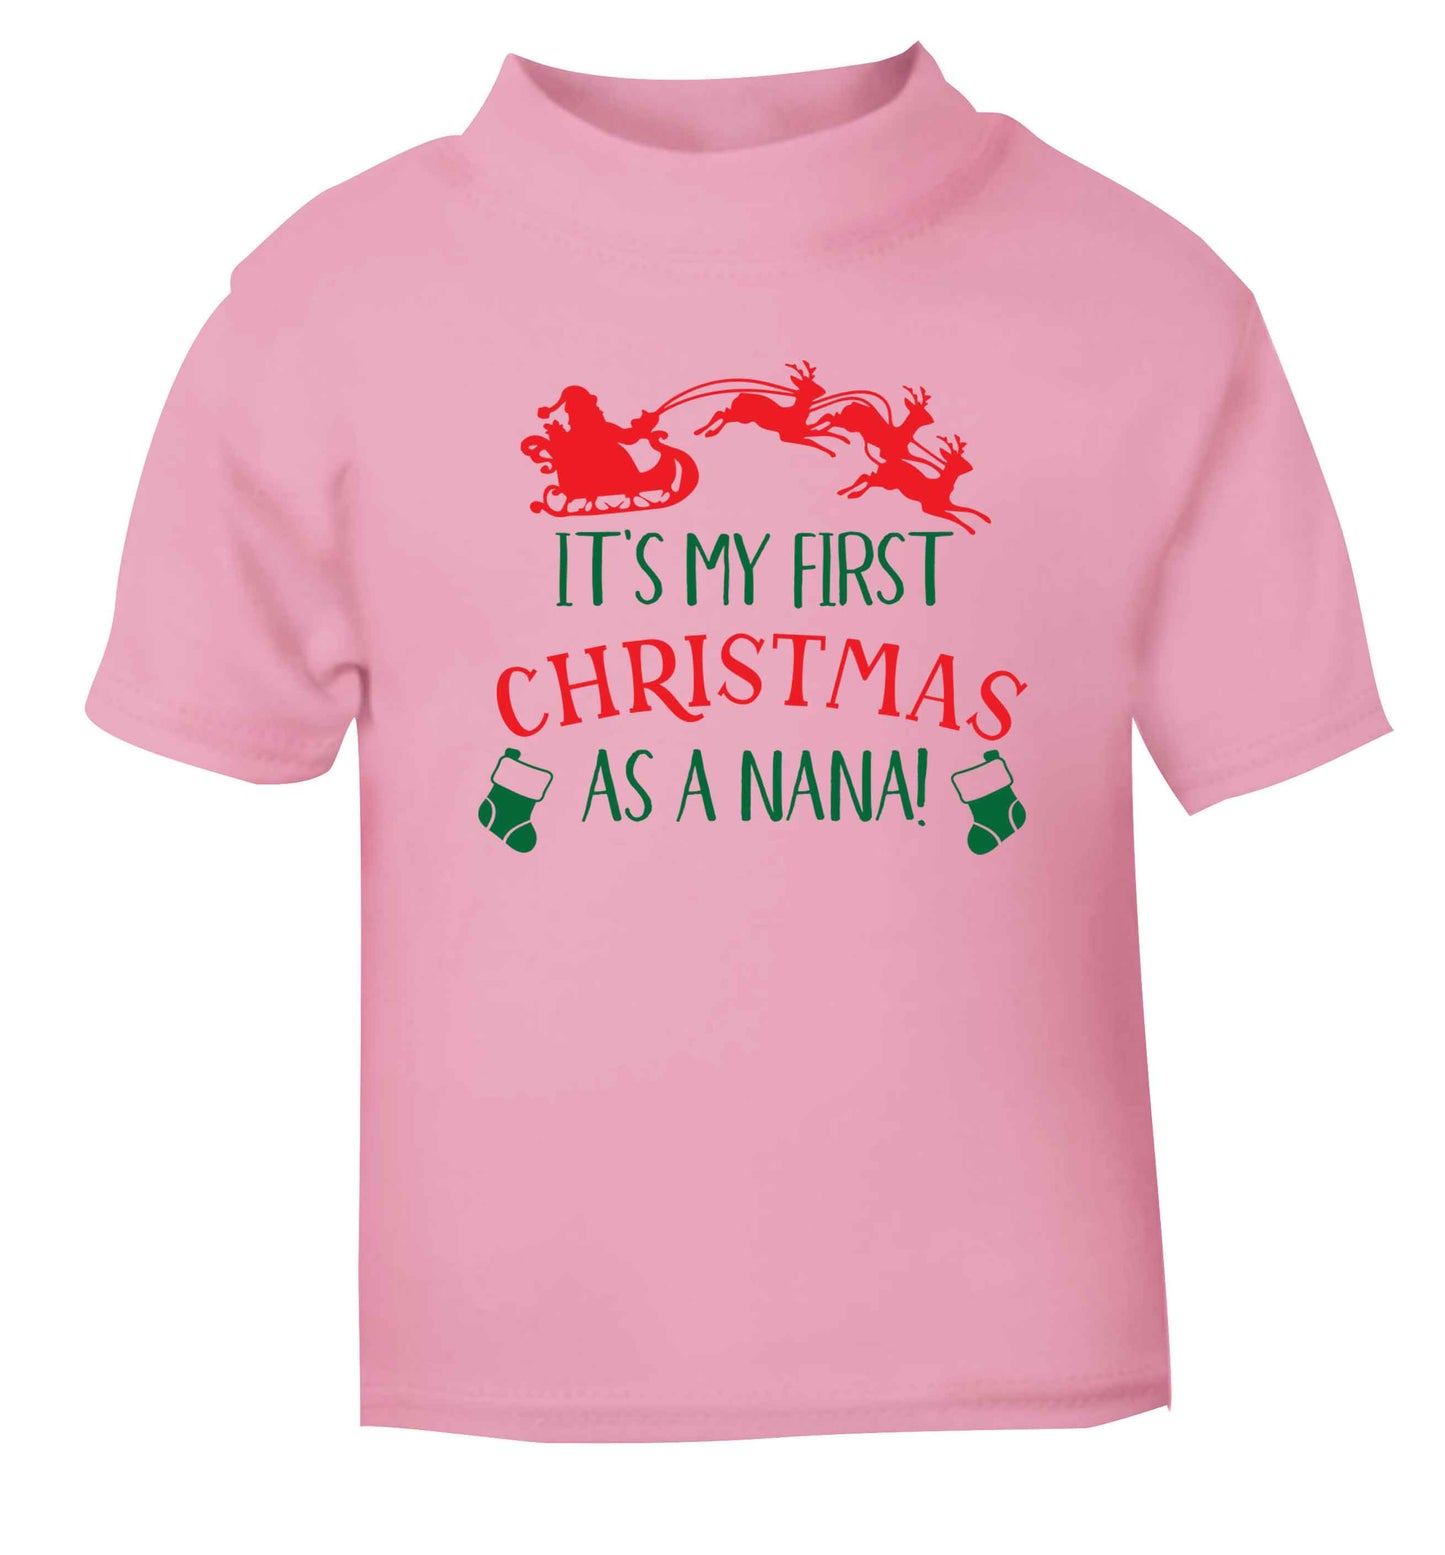 It's my first Christmas as a nana light pink Baby Toddler Tshirt 2 Years